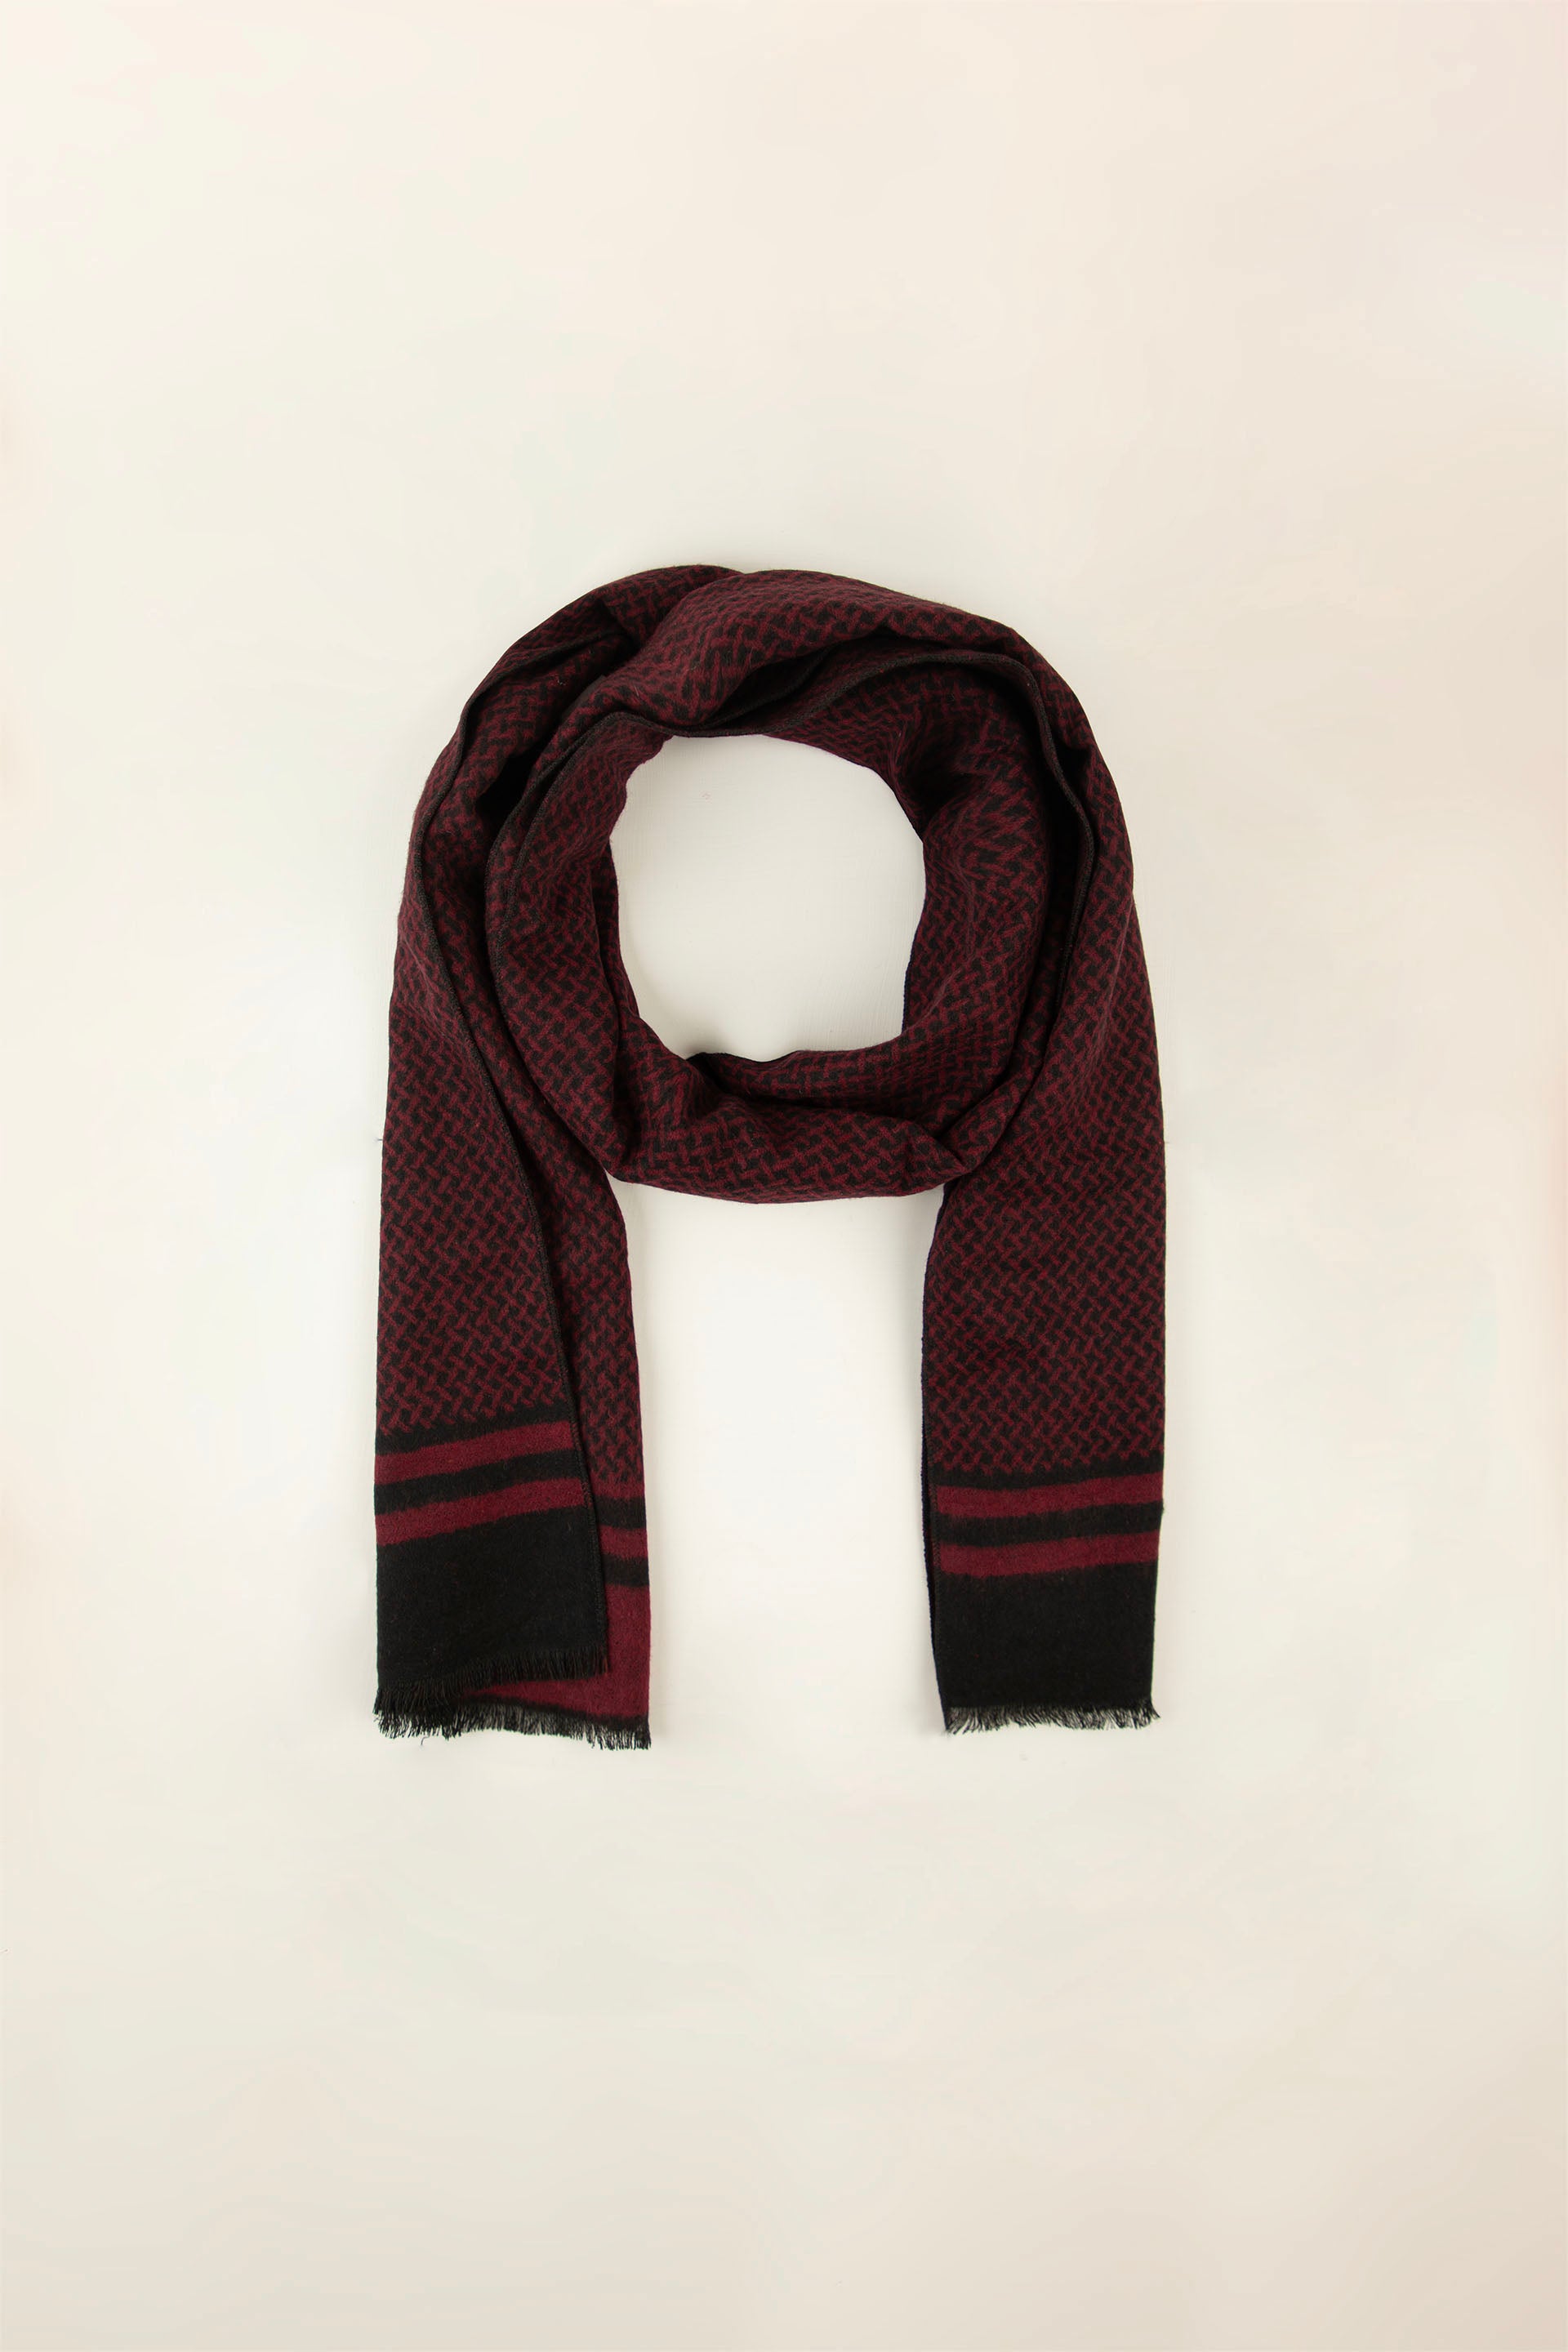 Textured Scarf Black/Red